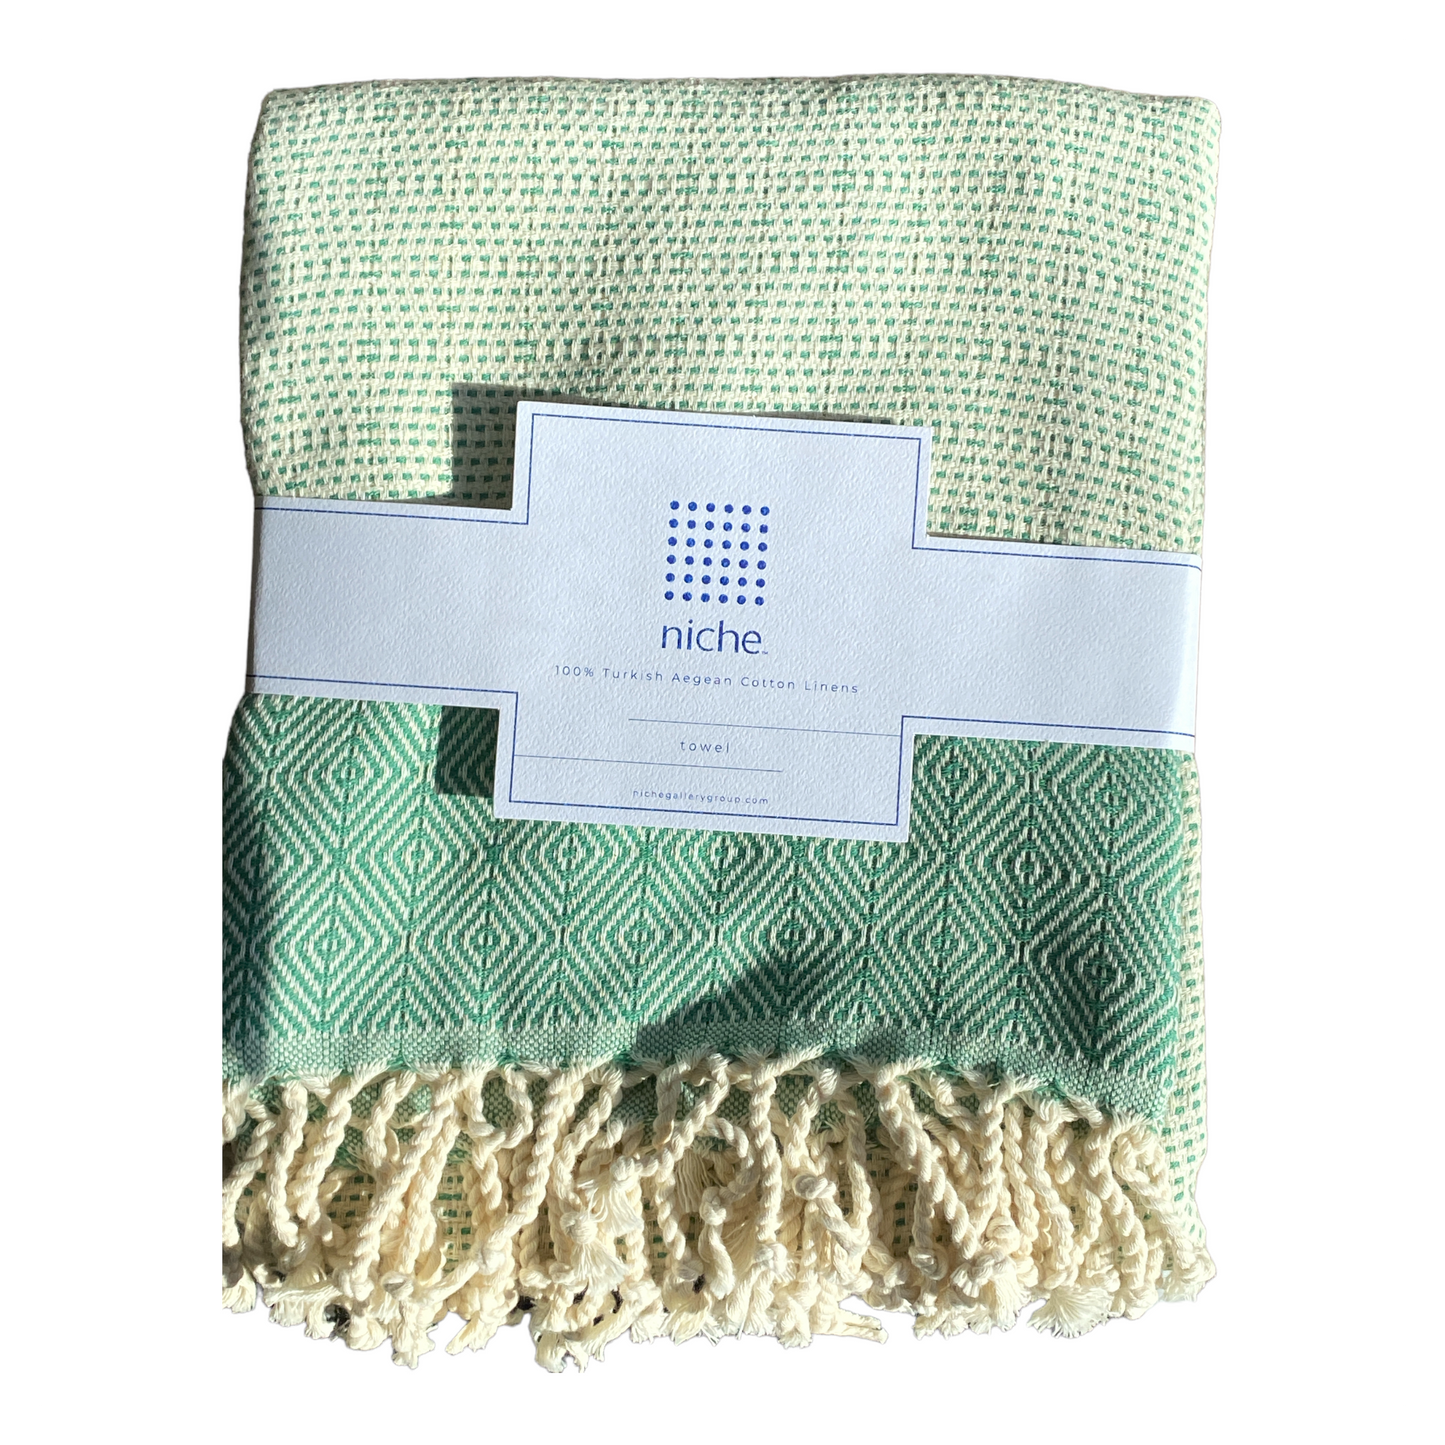 Green Bodrum Turkish Towel - Curated Home Decor